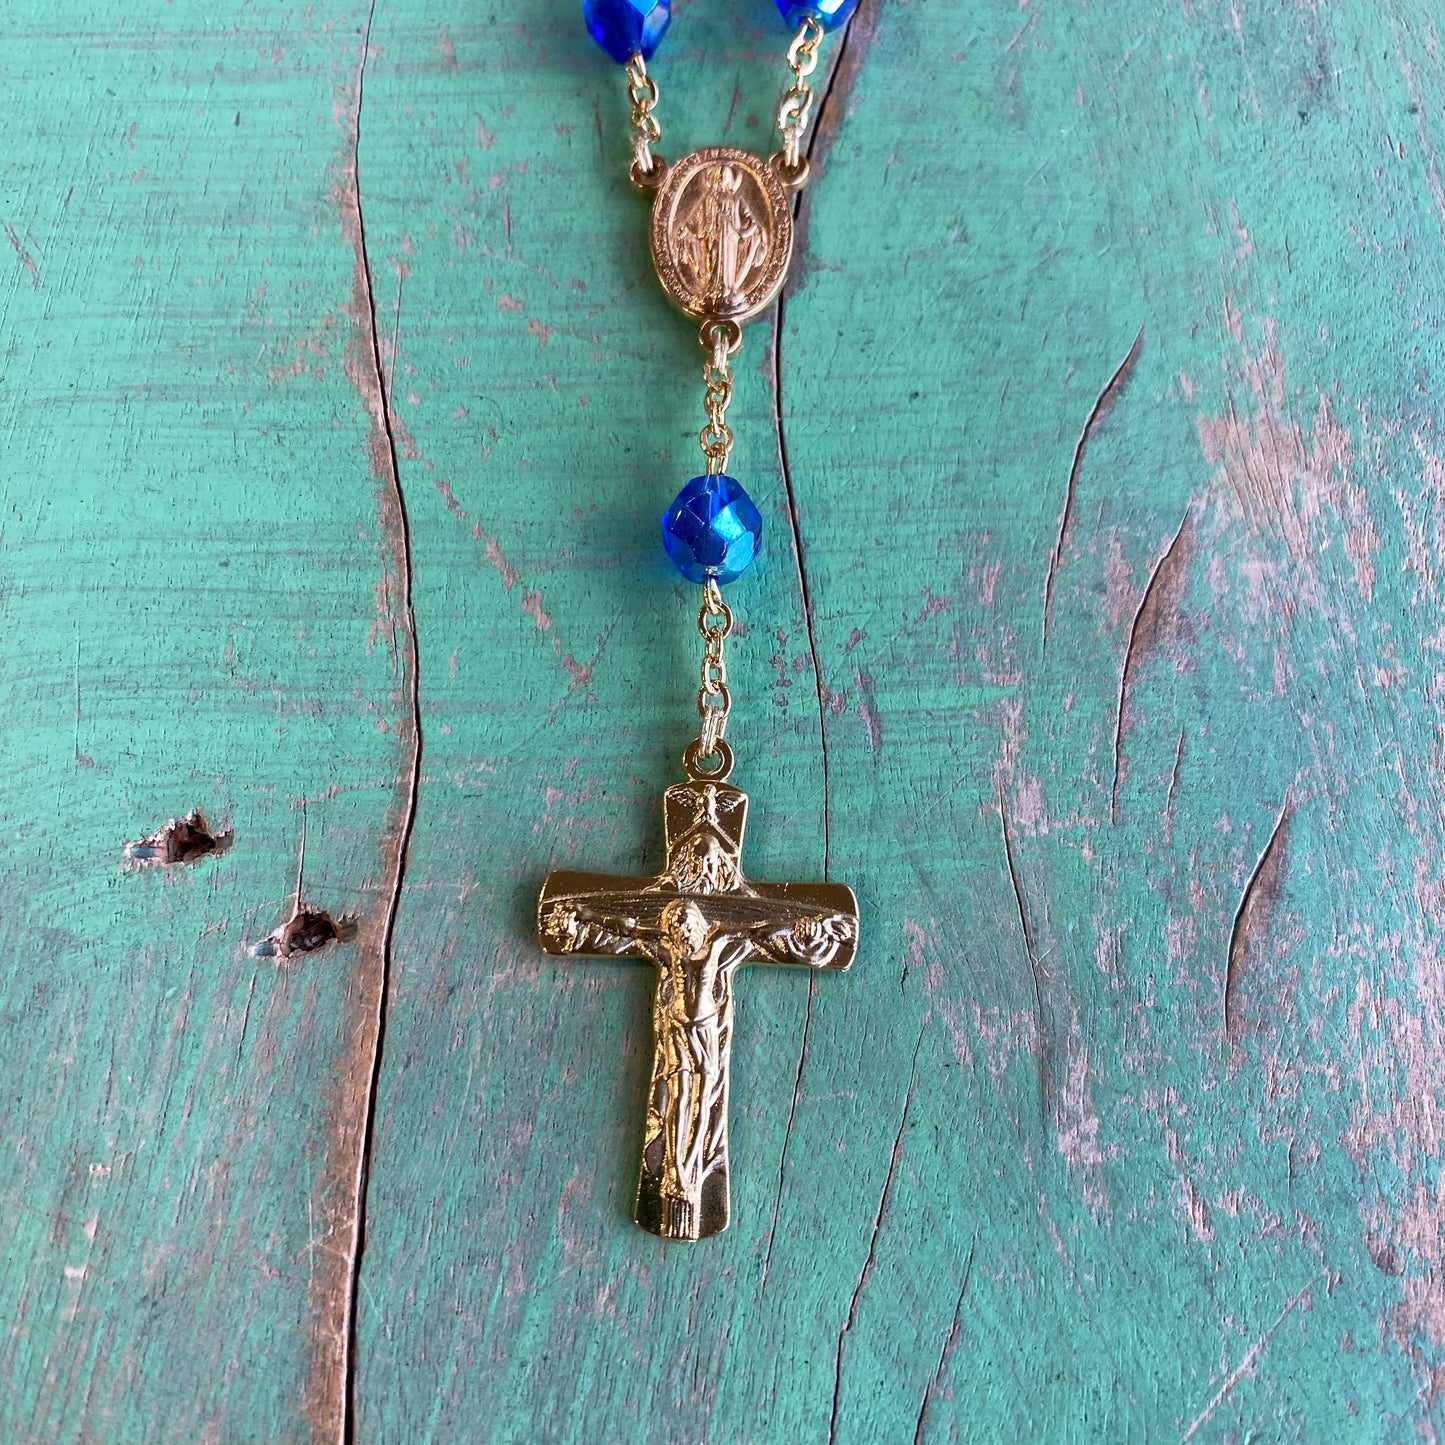 Miraculous Medal Crystal Blue Decade Rosary